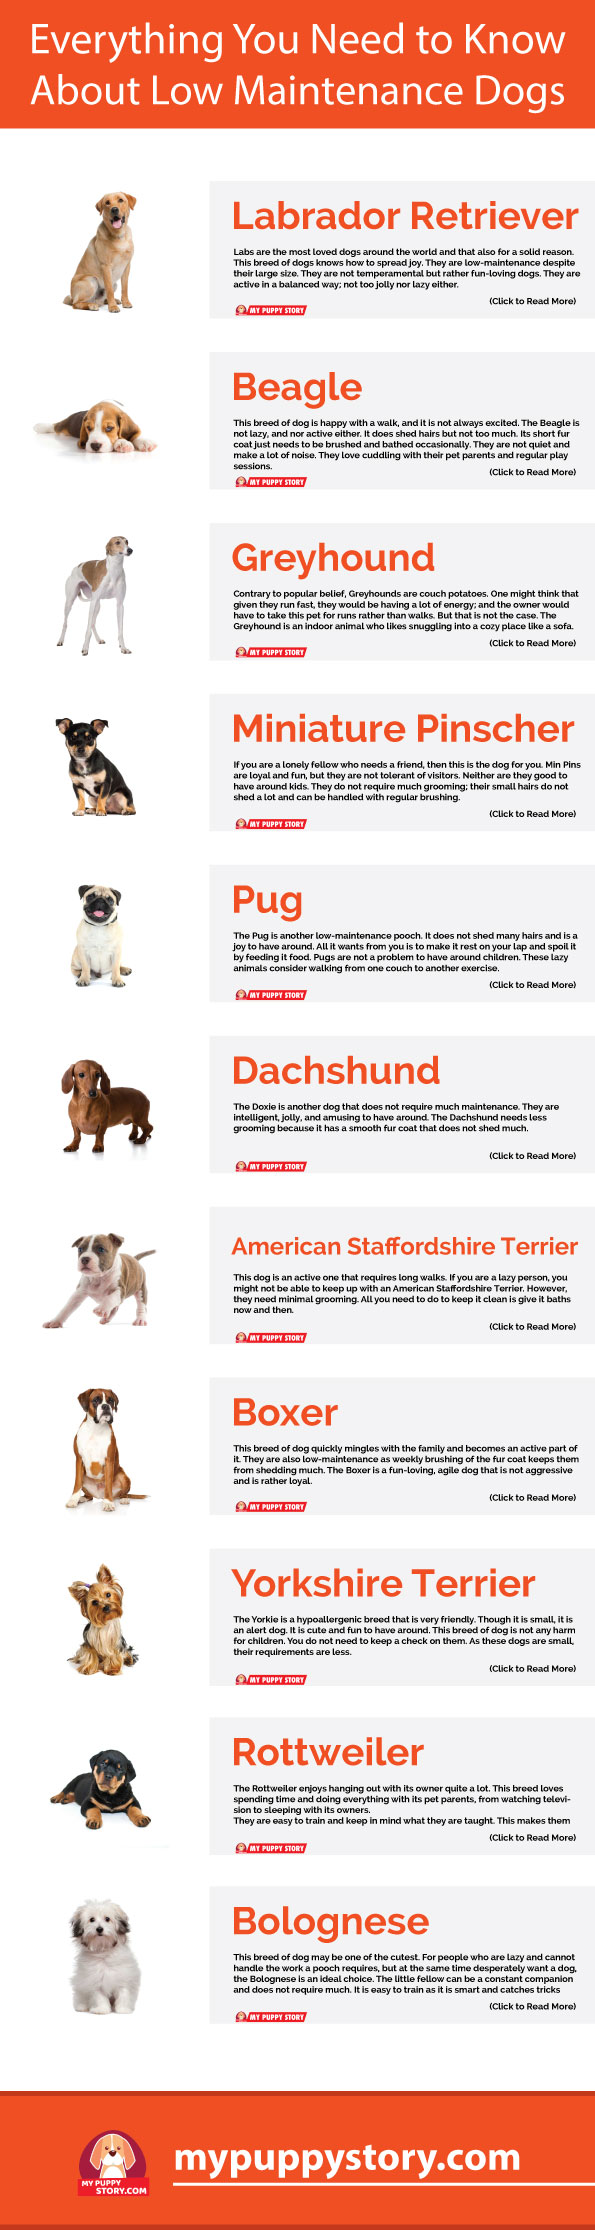 low maintenance small dog breeds